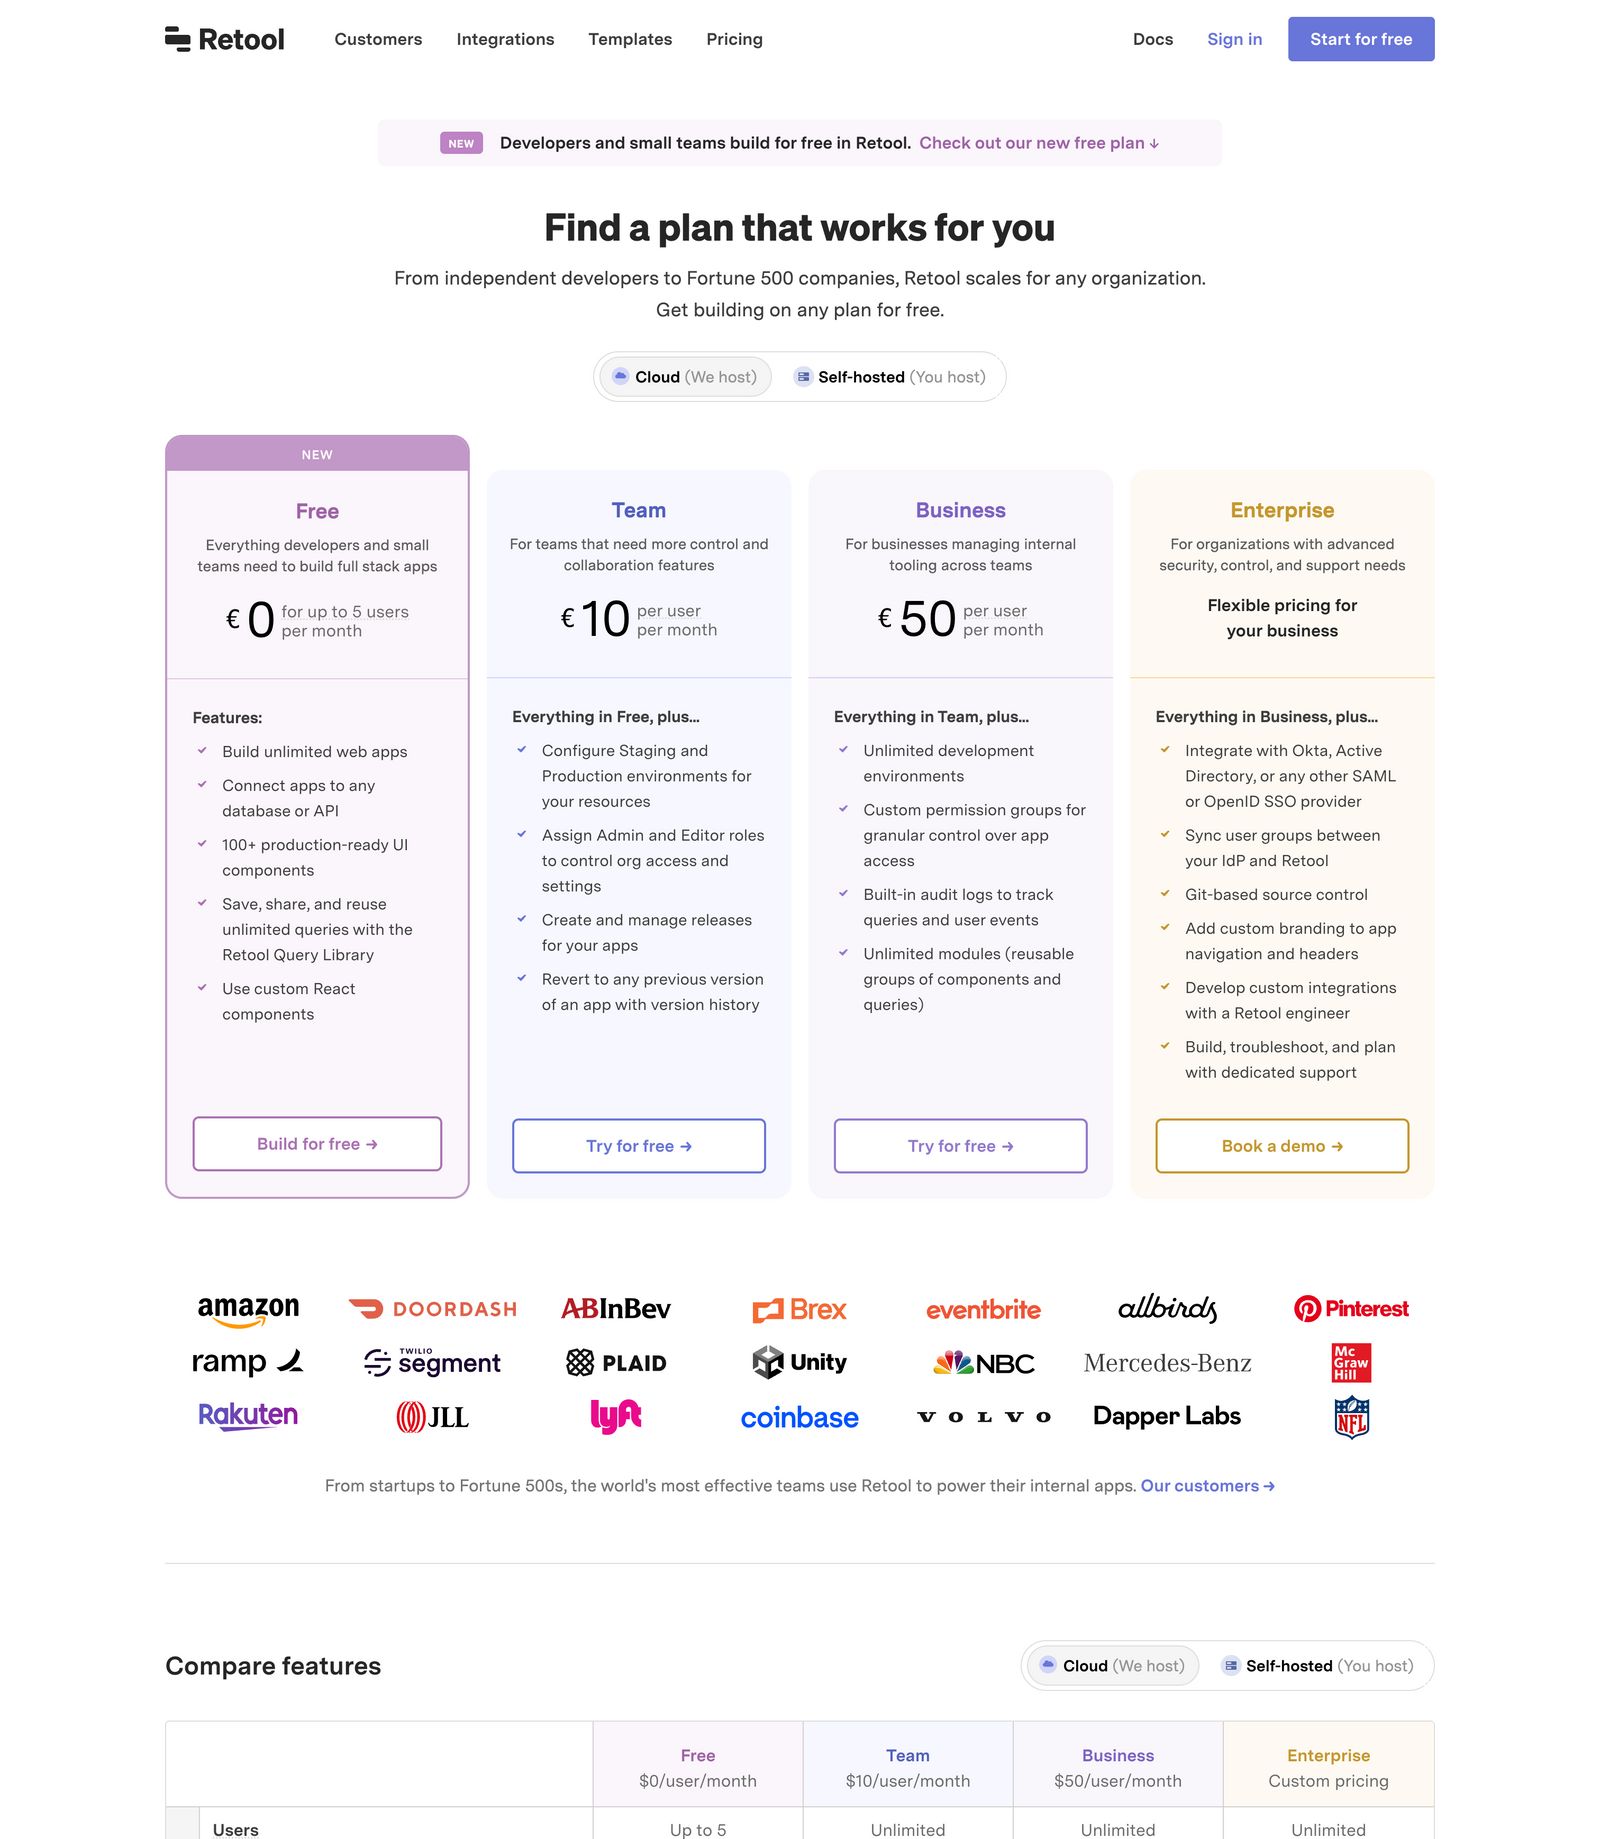 /articles/pricing-page-inspiration/pricing-page-design-example-4.jpg)_Pricing page example from Retool